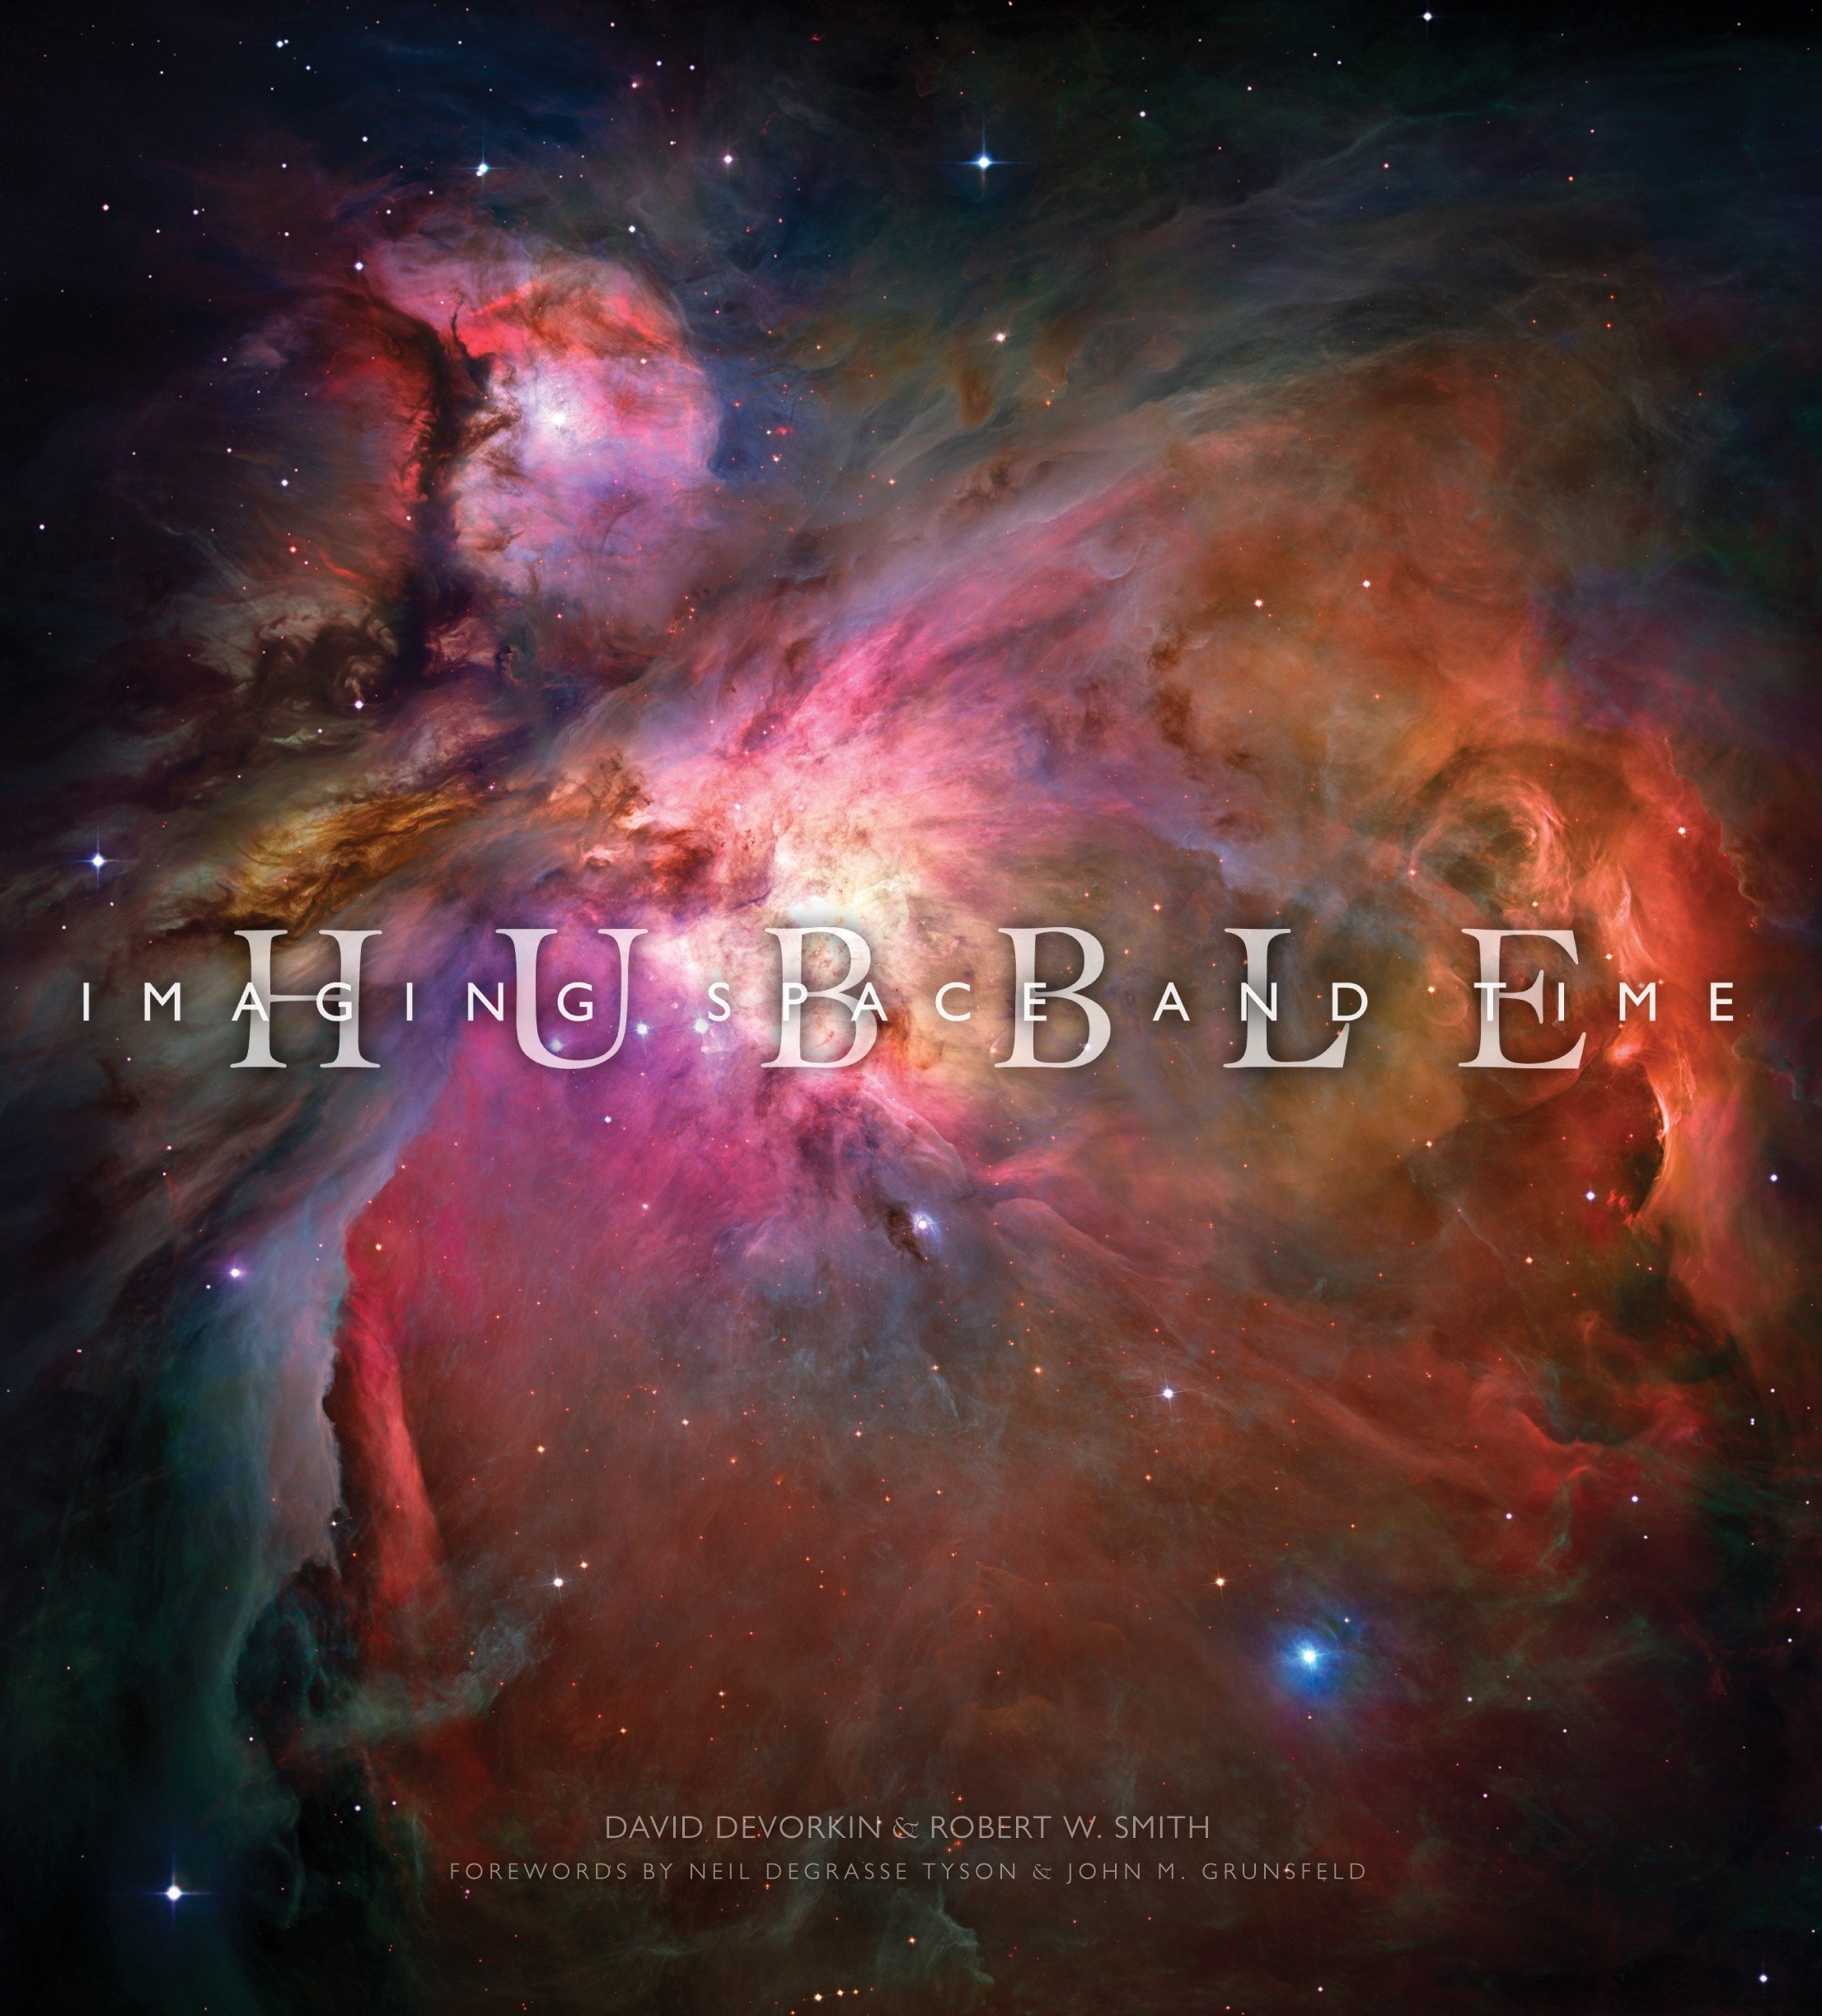 Book cover for Hubble: Imaging Space and Time by David H. Devorkin and Robert Smith.